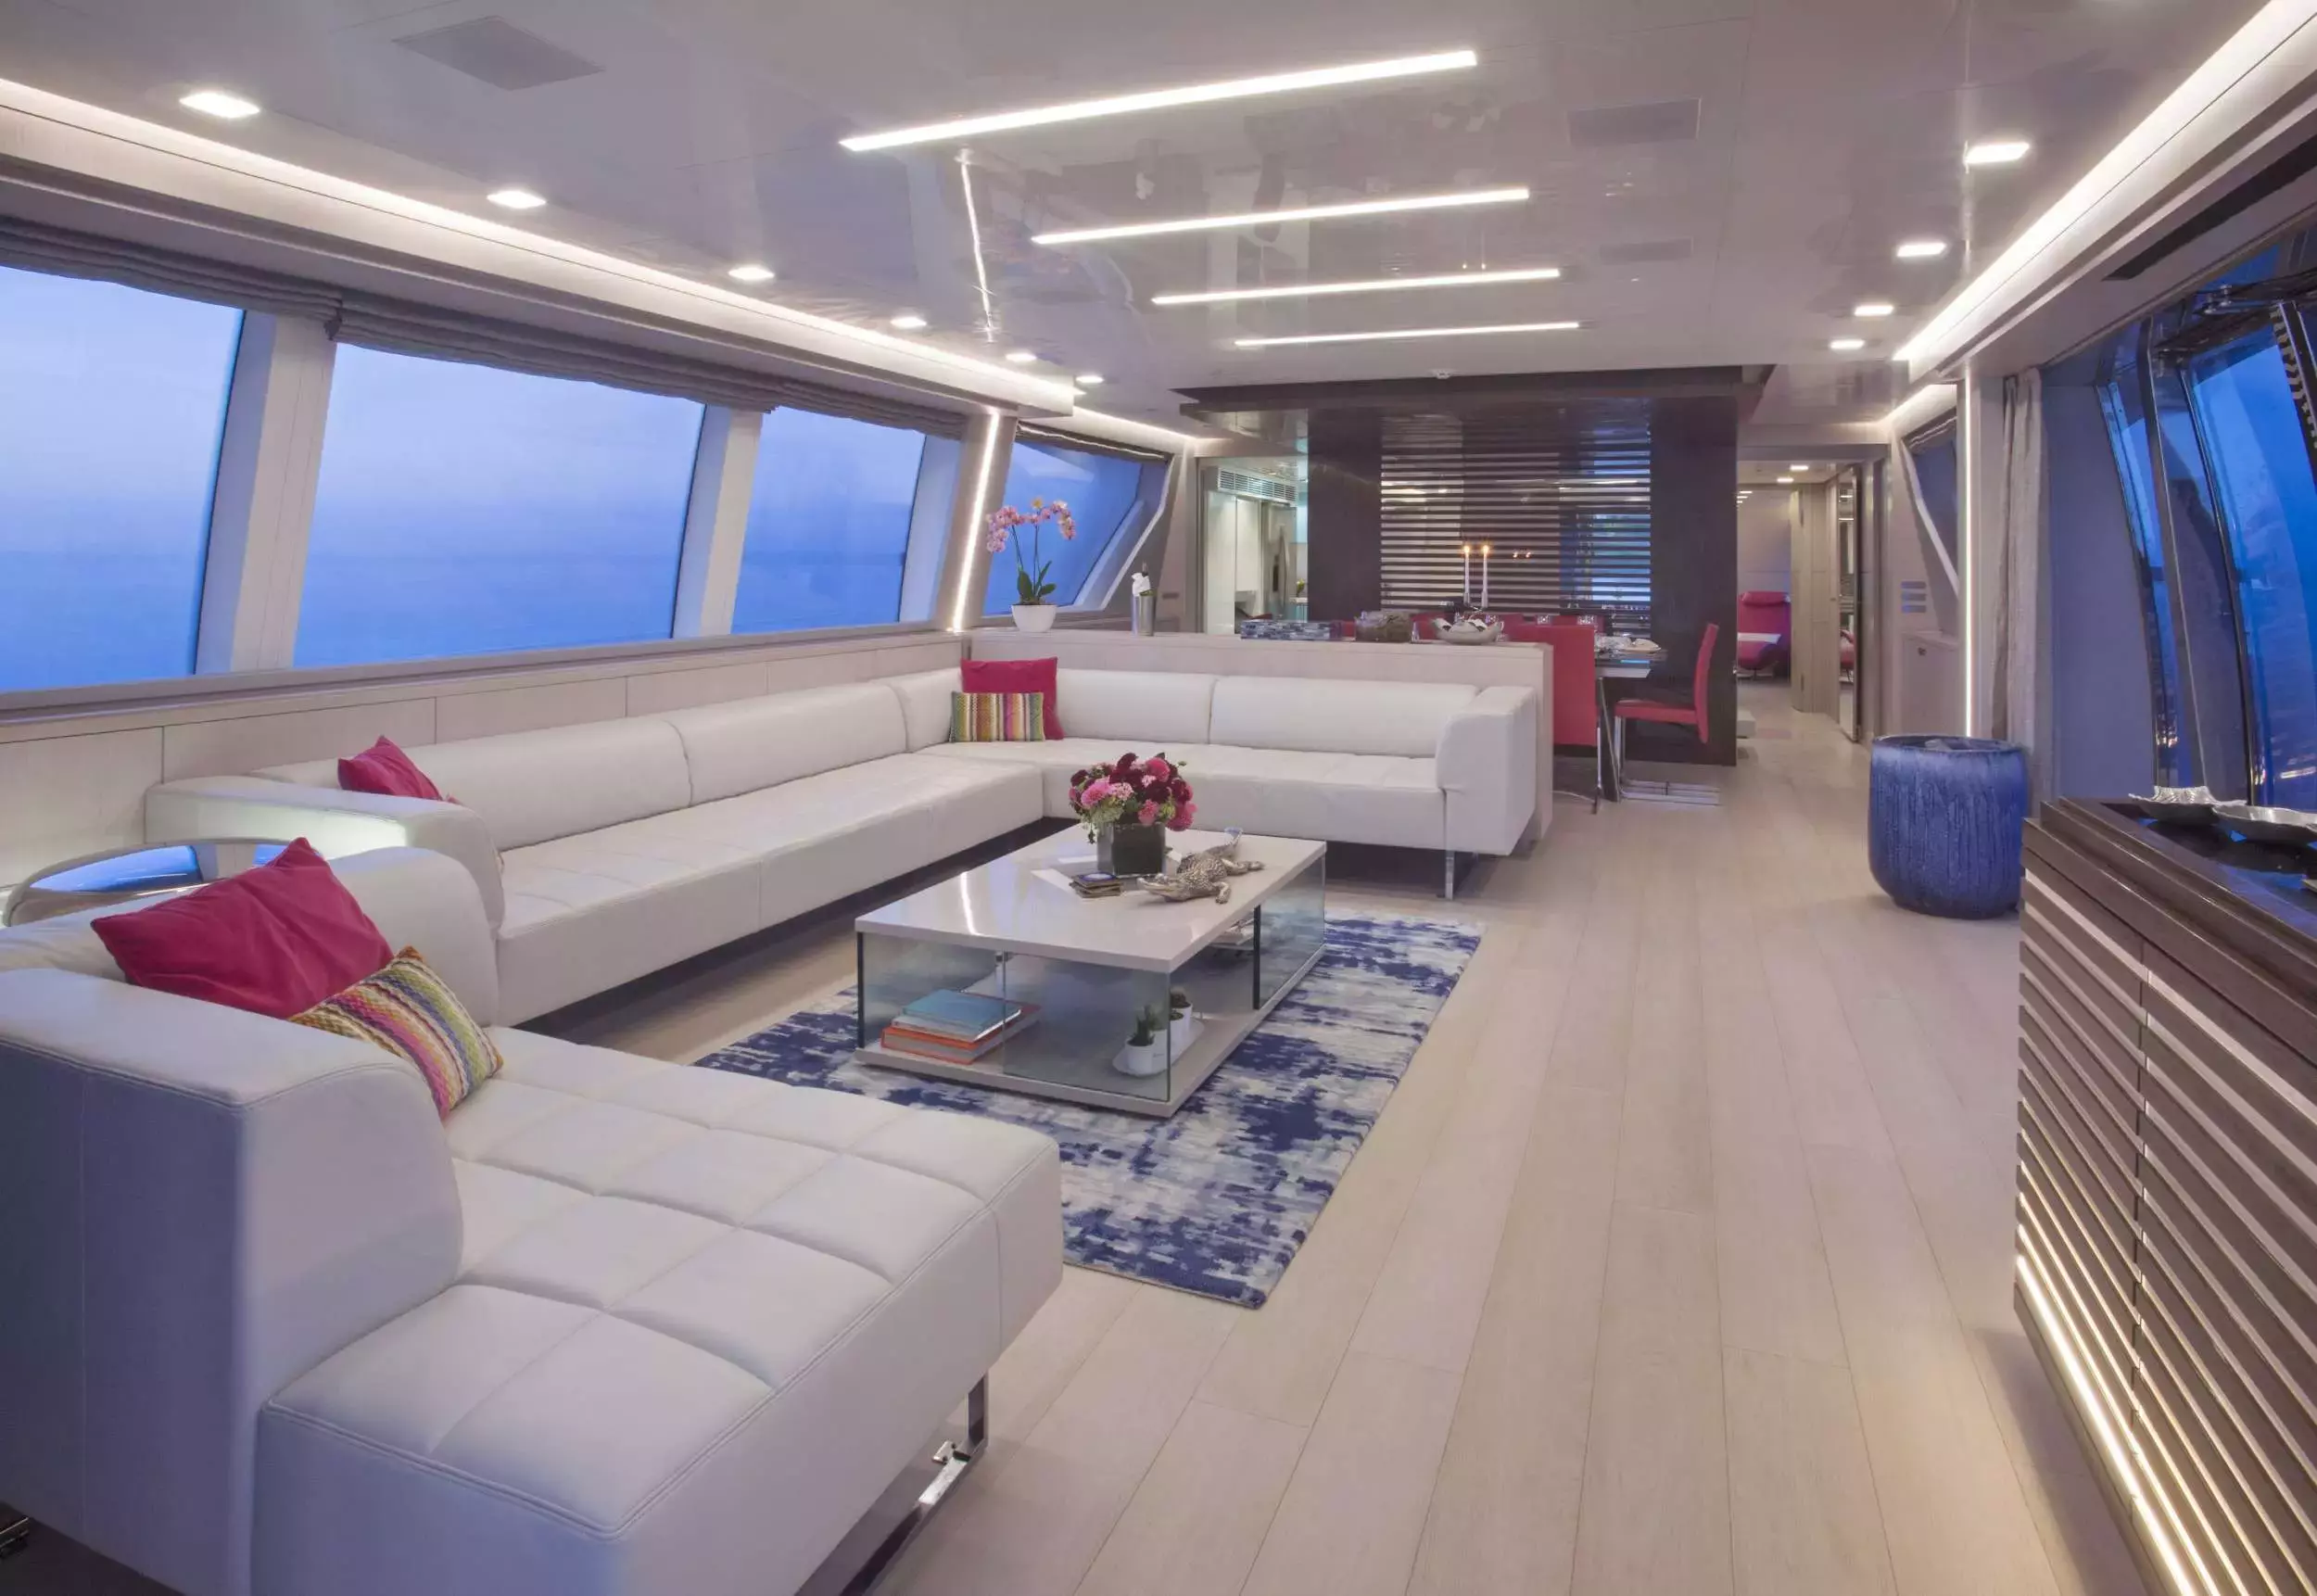 Alandrea by Ferretti - Top rates for a Charter of a private Superyacht in Bahamas